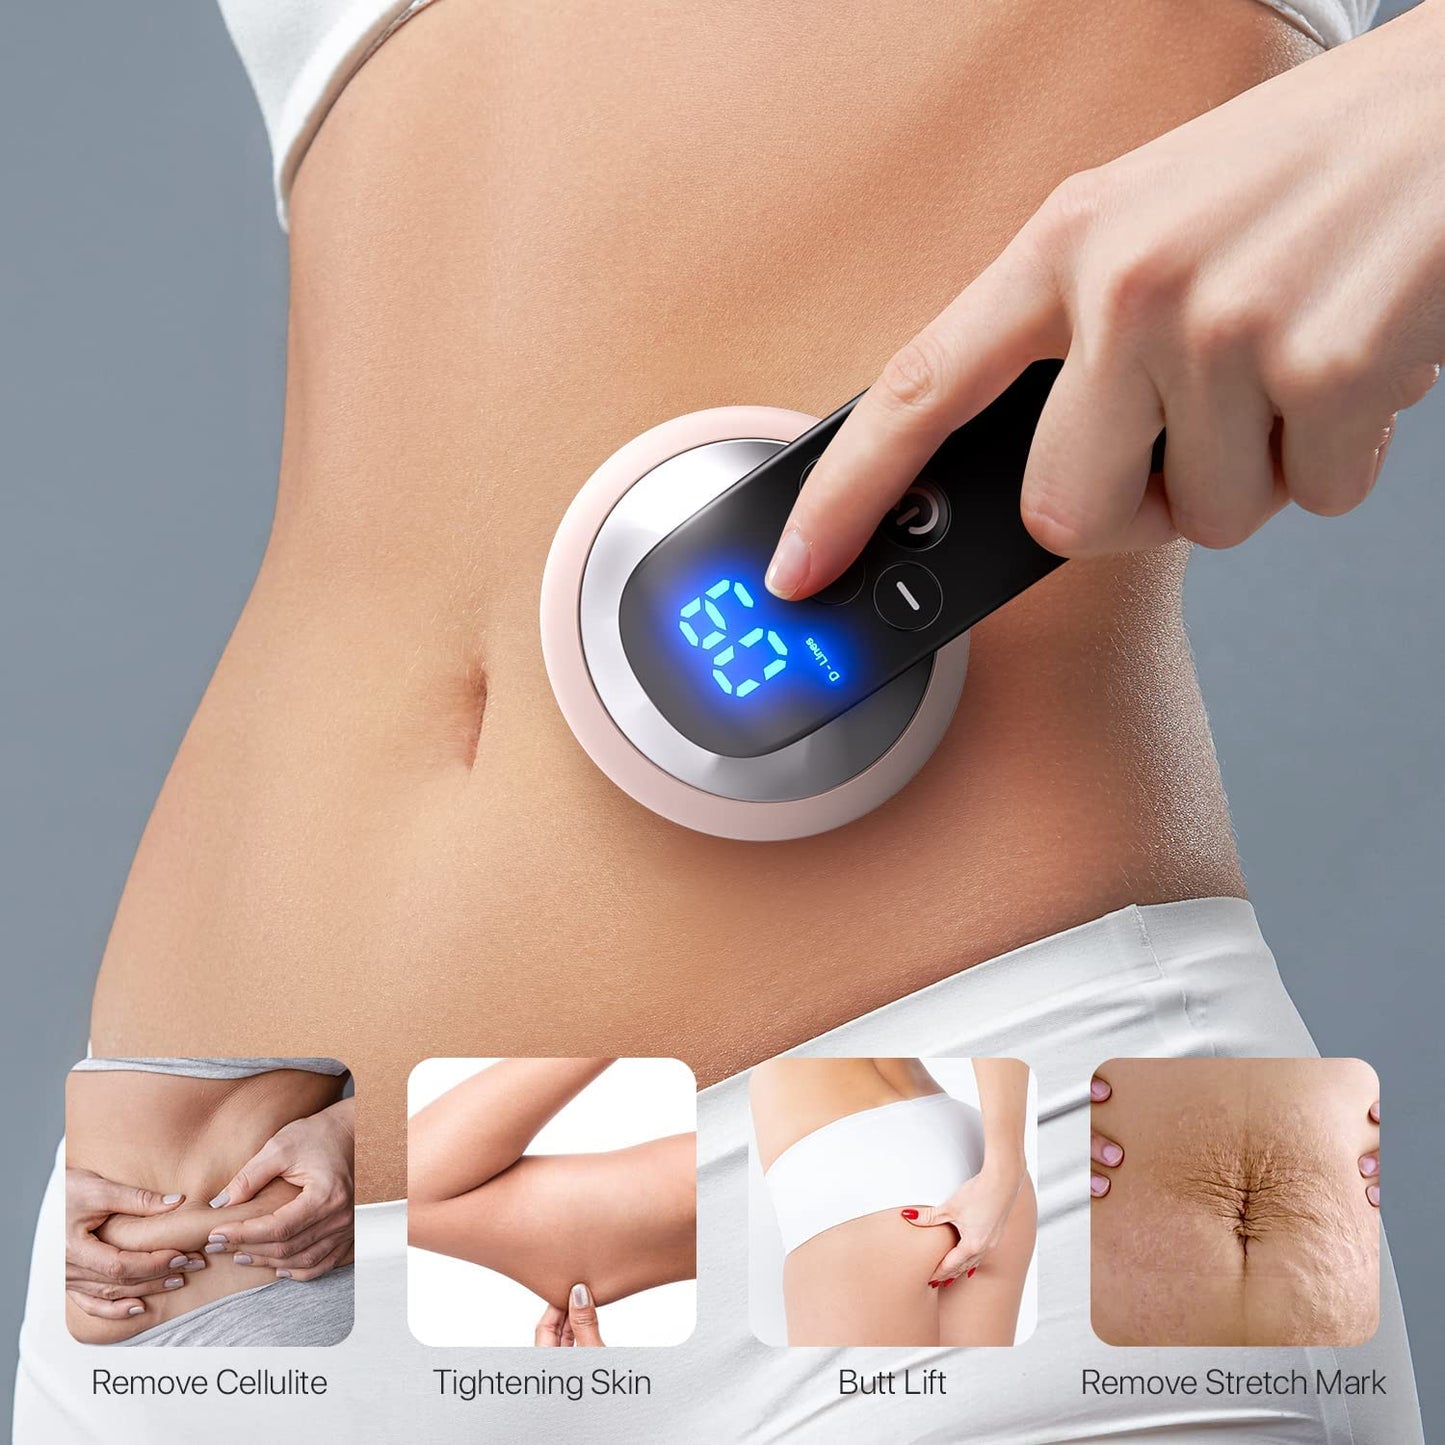 Cellulite Massager – Professional Body Sculpting Machine – Cellulite Remover and Stretch Marks Removal – Handheld Body Slimming Device for Belly Fat, Waist, Arm, Leg, Butt